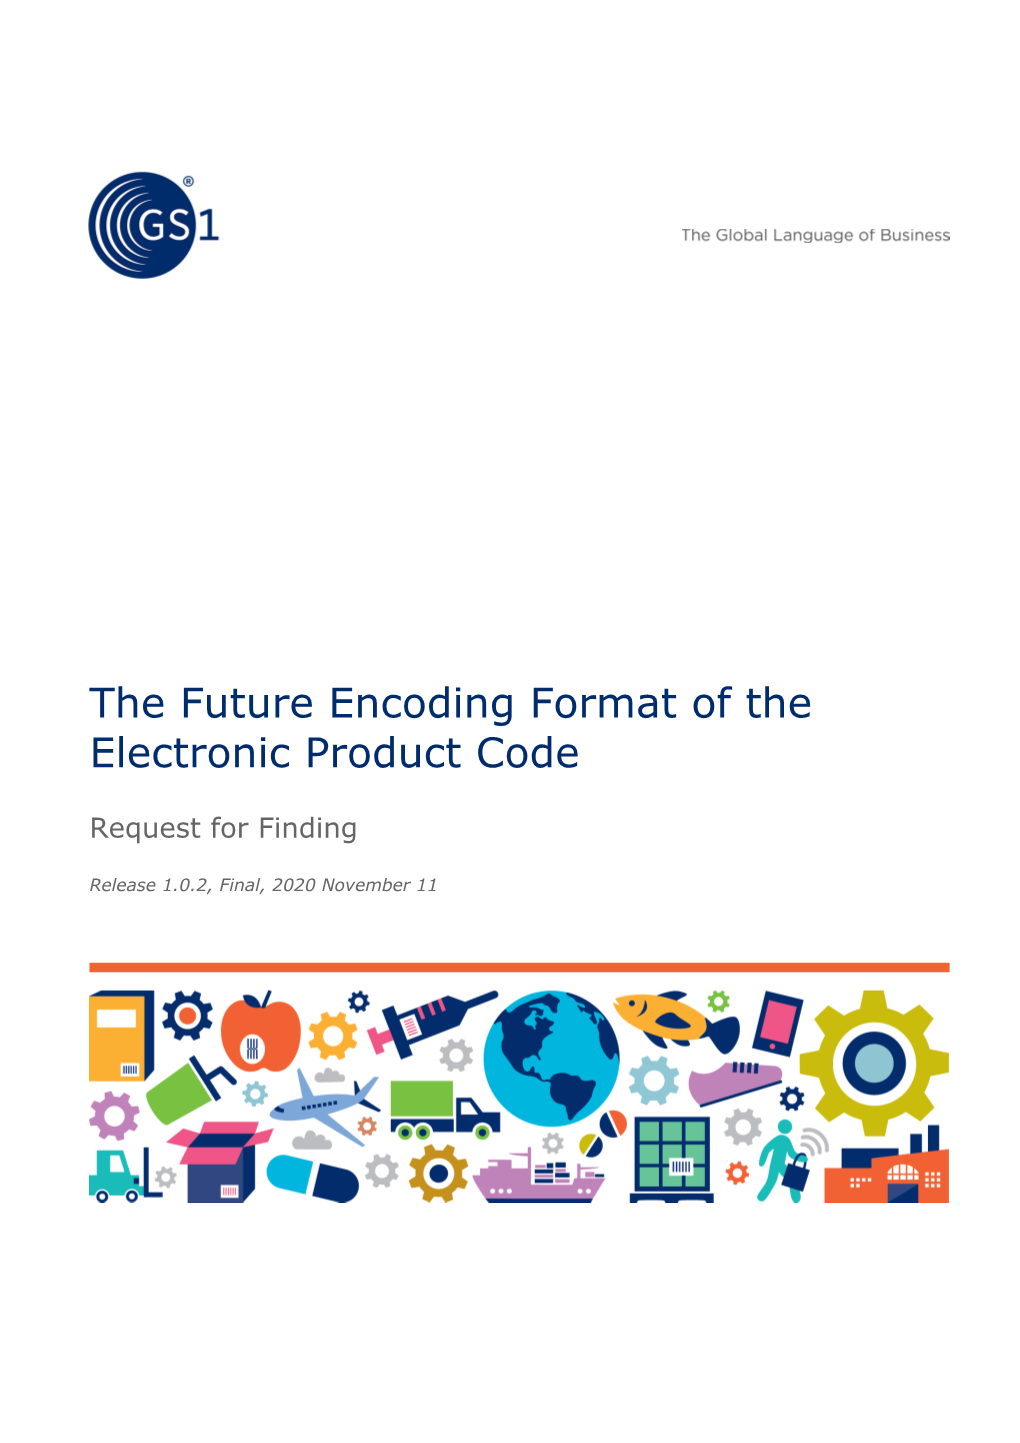 The Future Encoding Format of the Electronic Product Code (EPC)